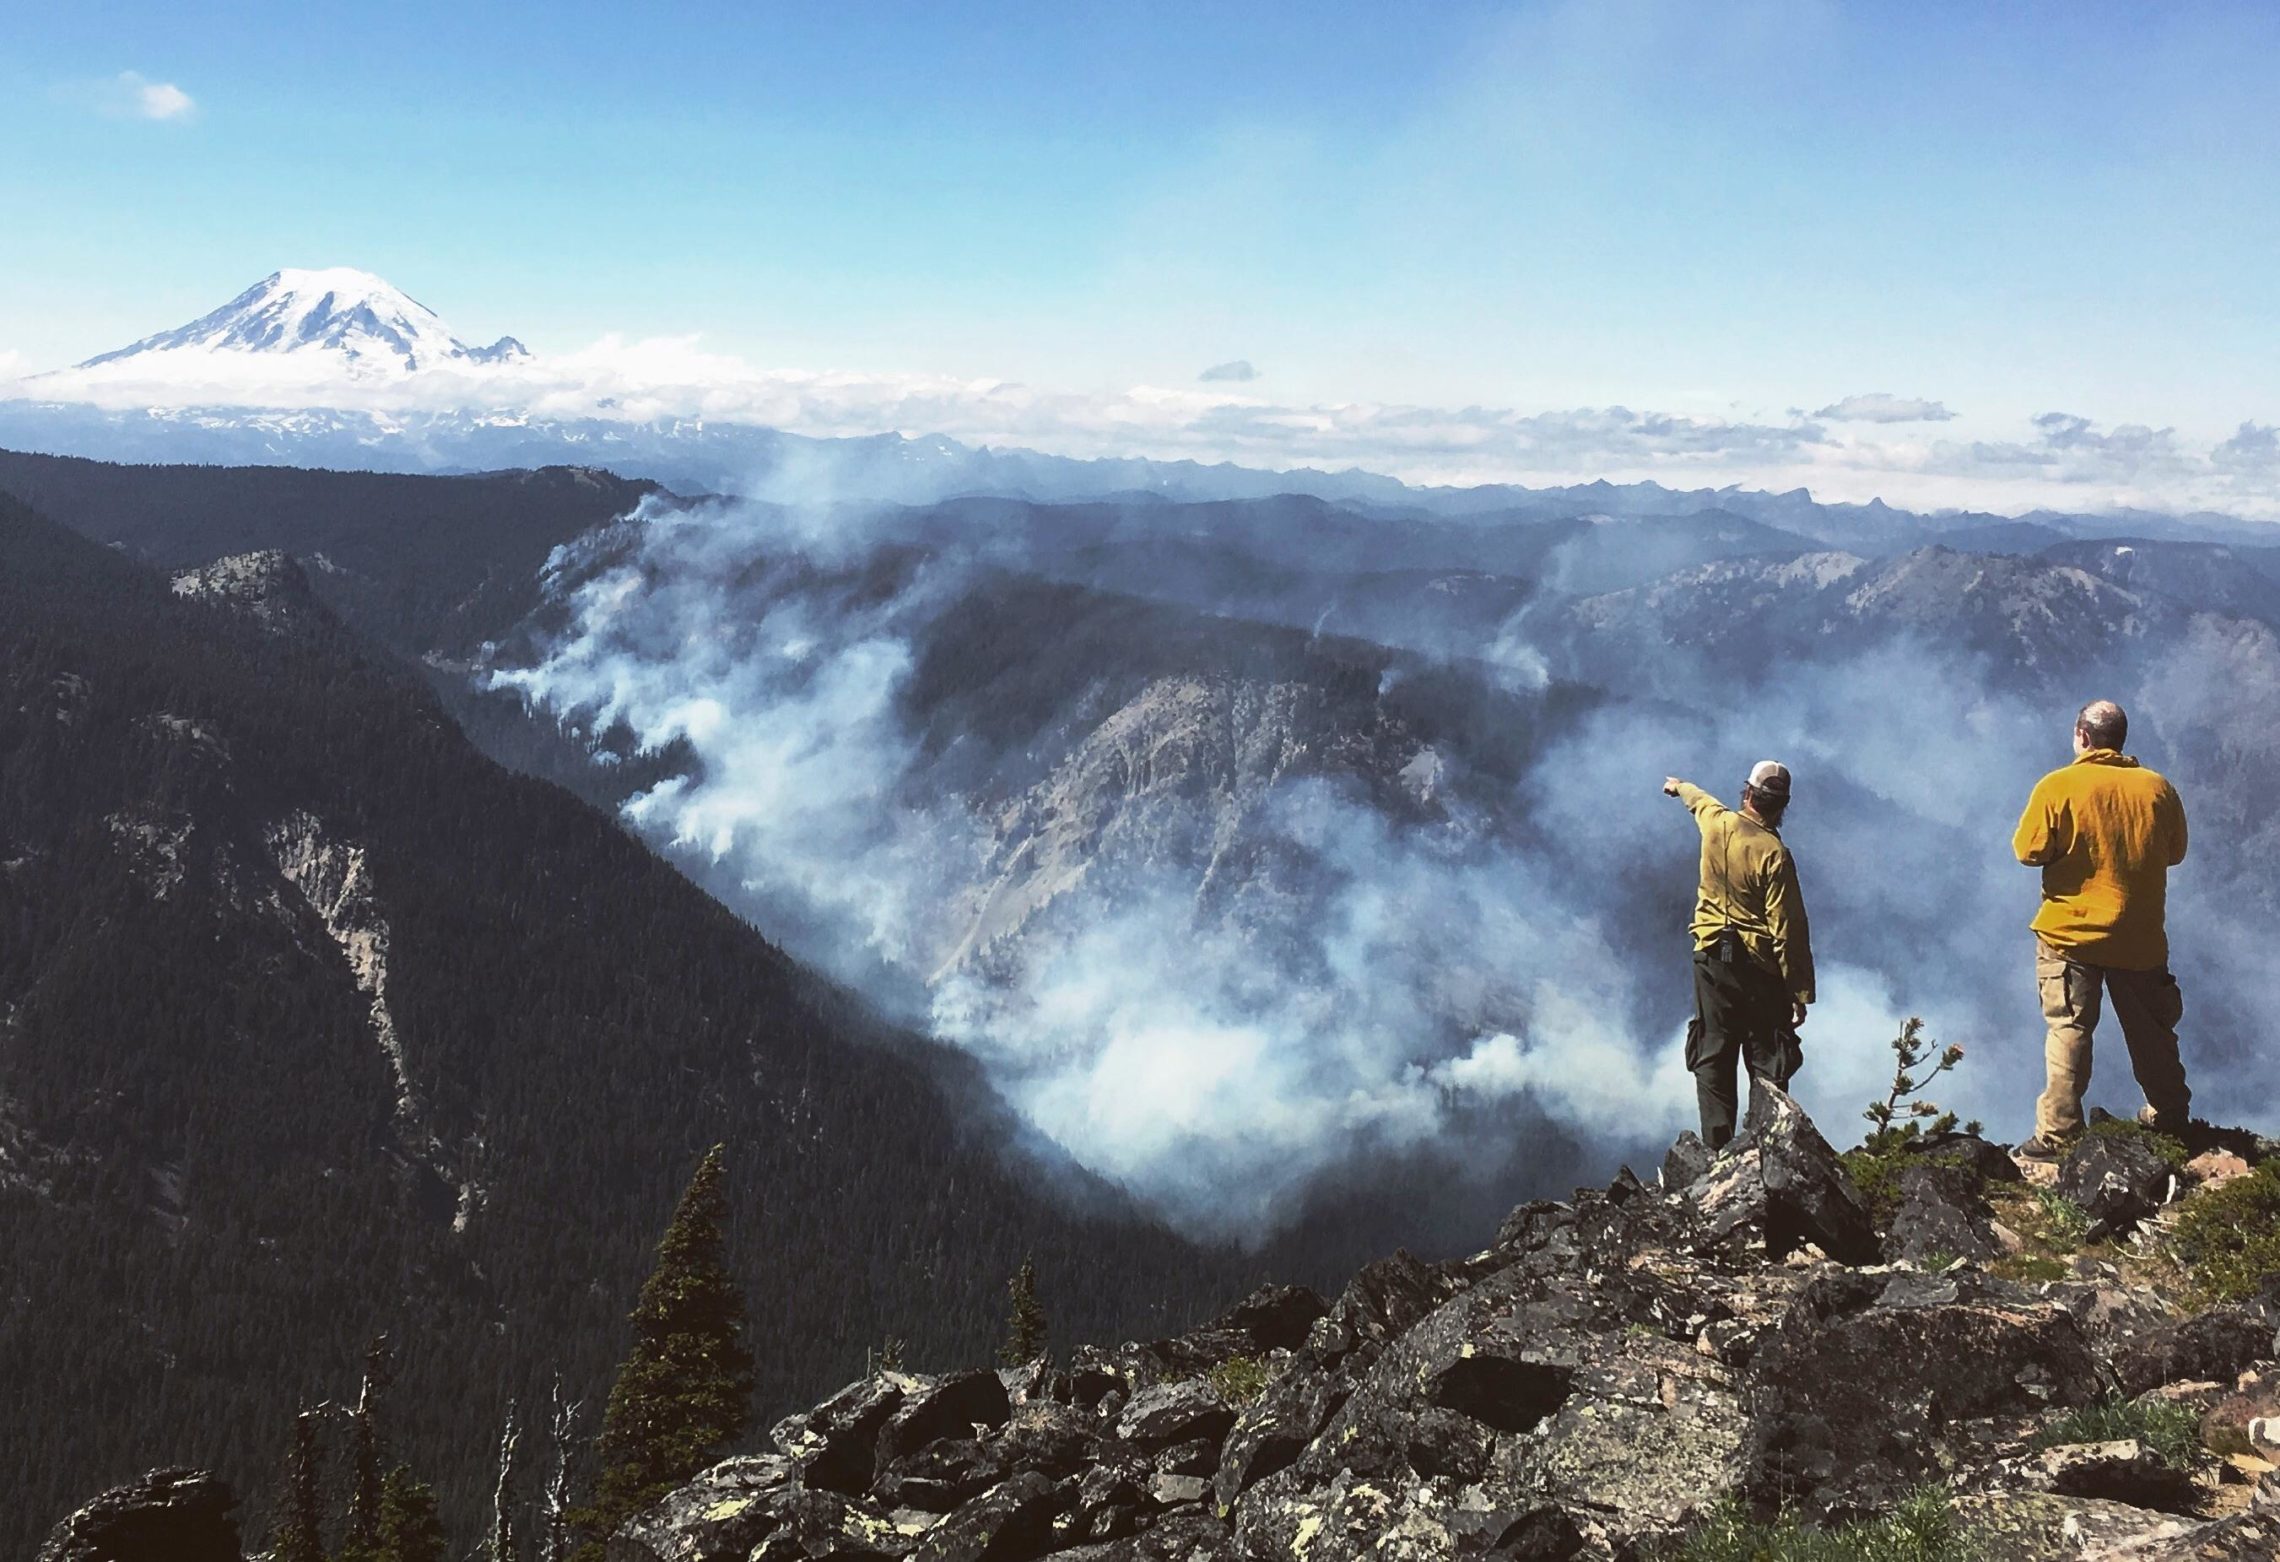 The Miriam Fire has been burning around Washington's White Pass since late July 2018. The Yakima County Sheriff's Office says Australian firefighters were not intentionally targeted and shot at by hunters in the area. CREDIT: JUSTIN GELB/INCIWEB